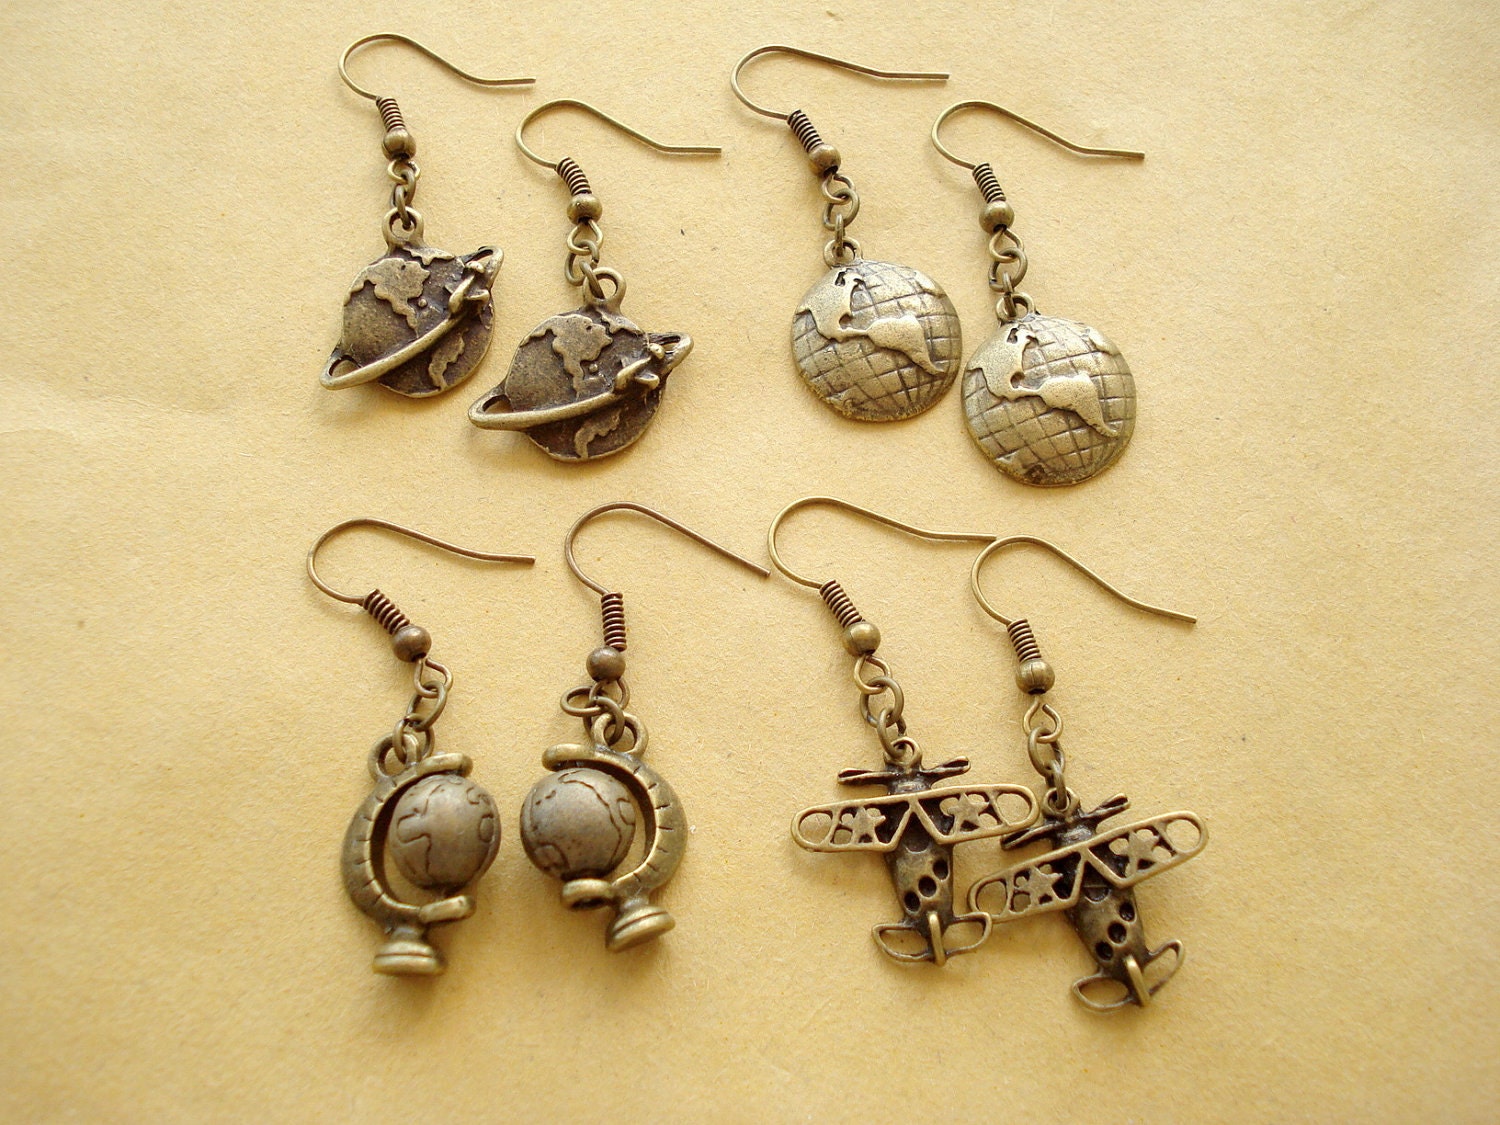 4 Pairs of Around the World Earrings / Antiqued Bronze